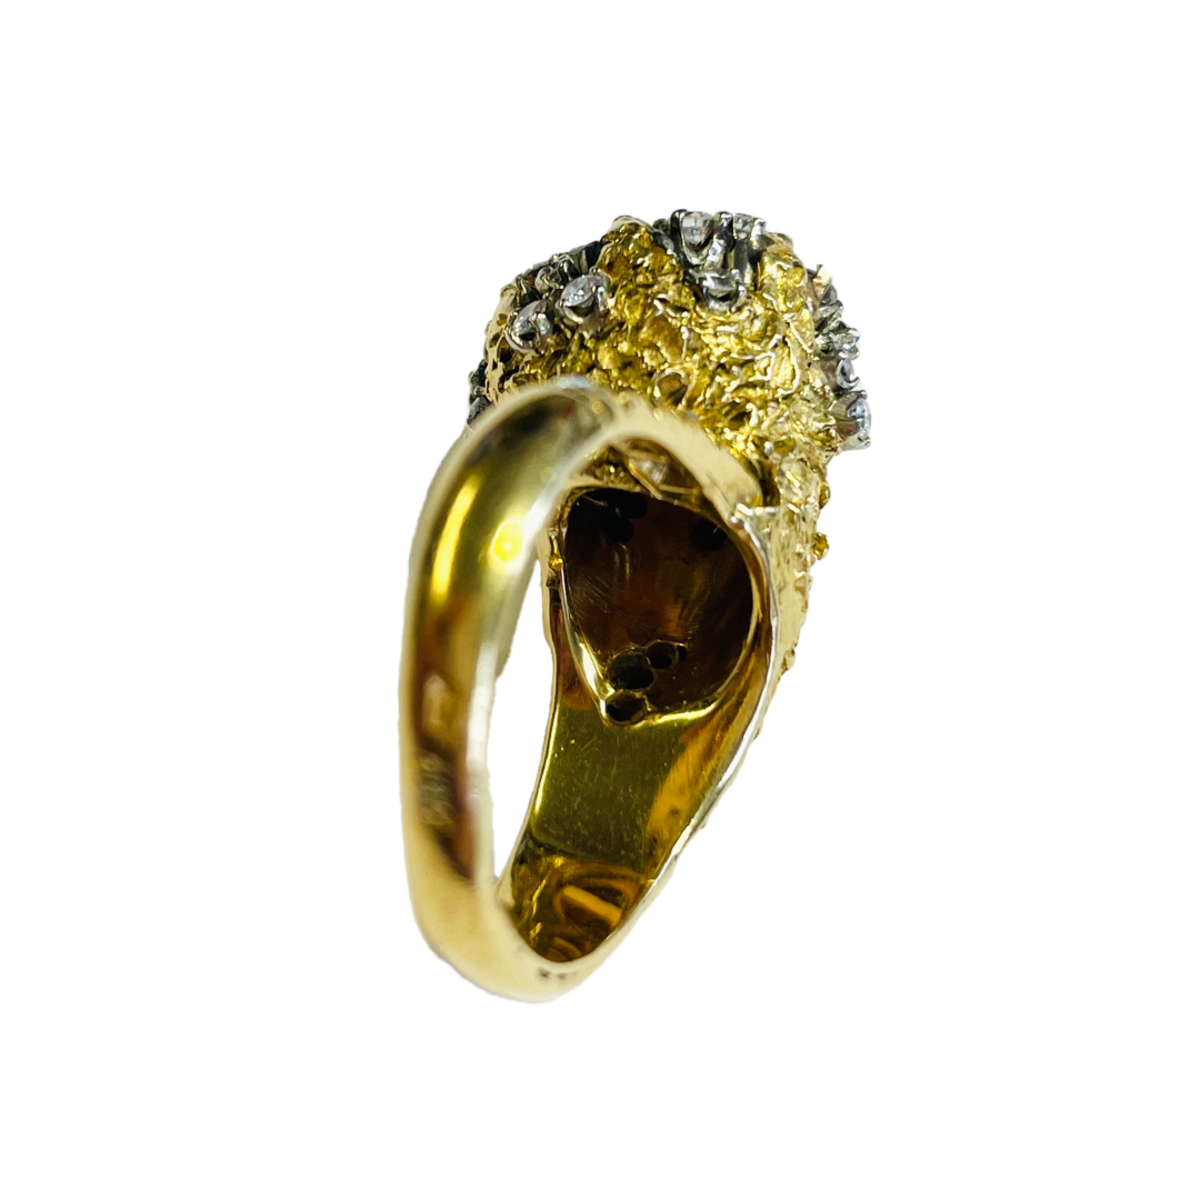 1960s 14KT Yellow Gold Citrine & Diamond Ring back view